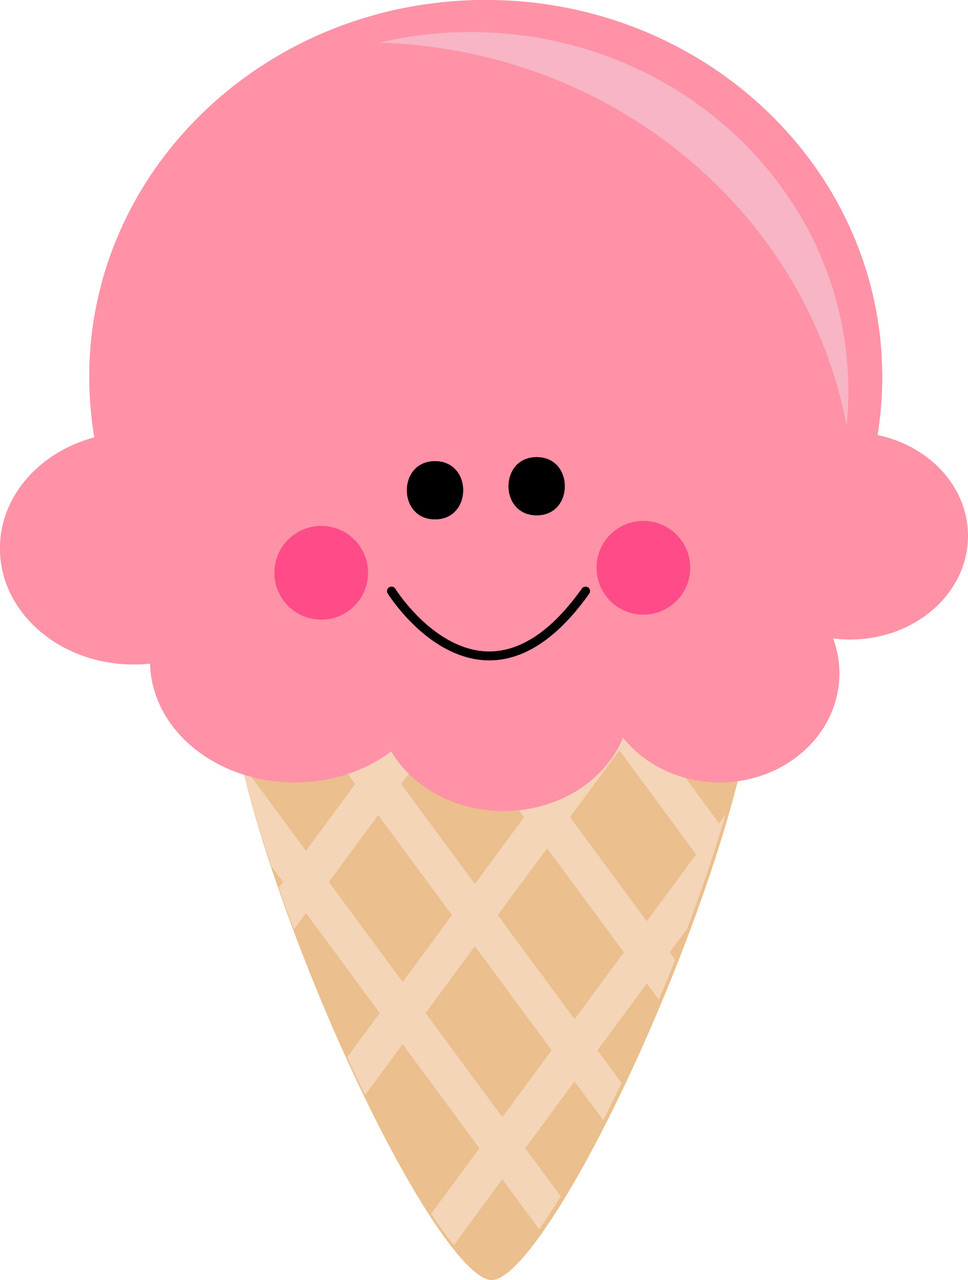 Ice Cream Clipart Free at GetDrawings.com.